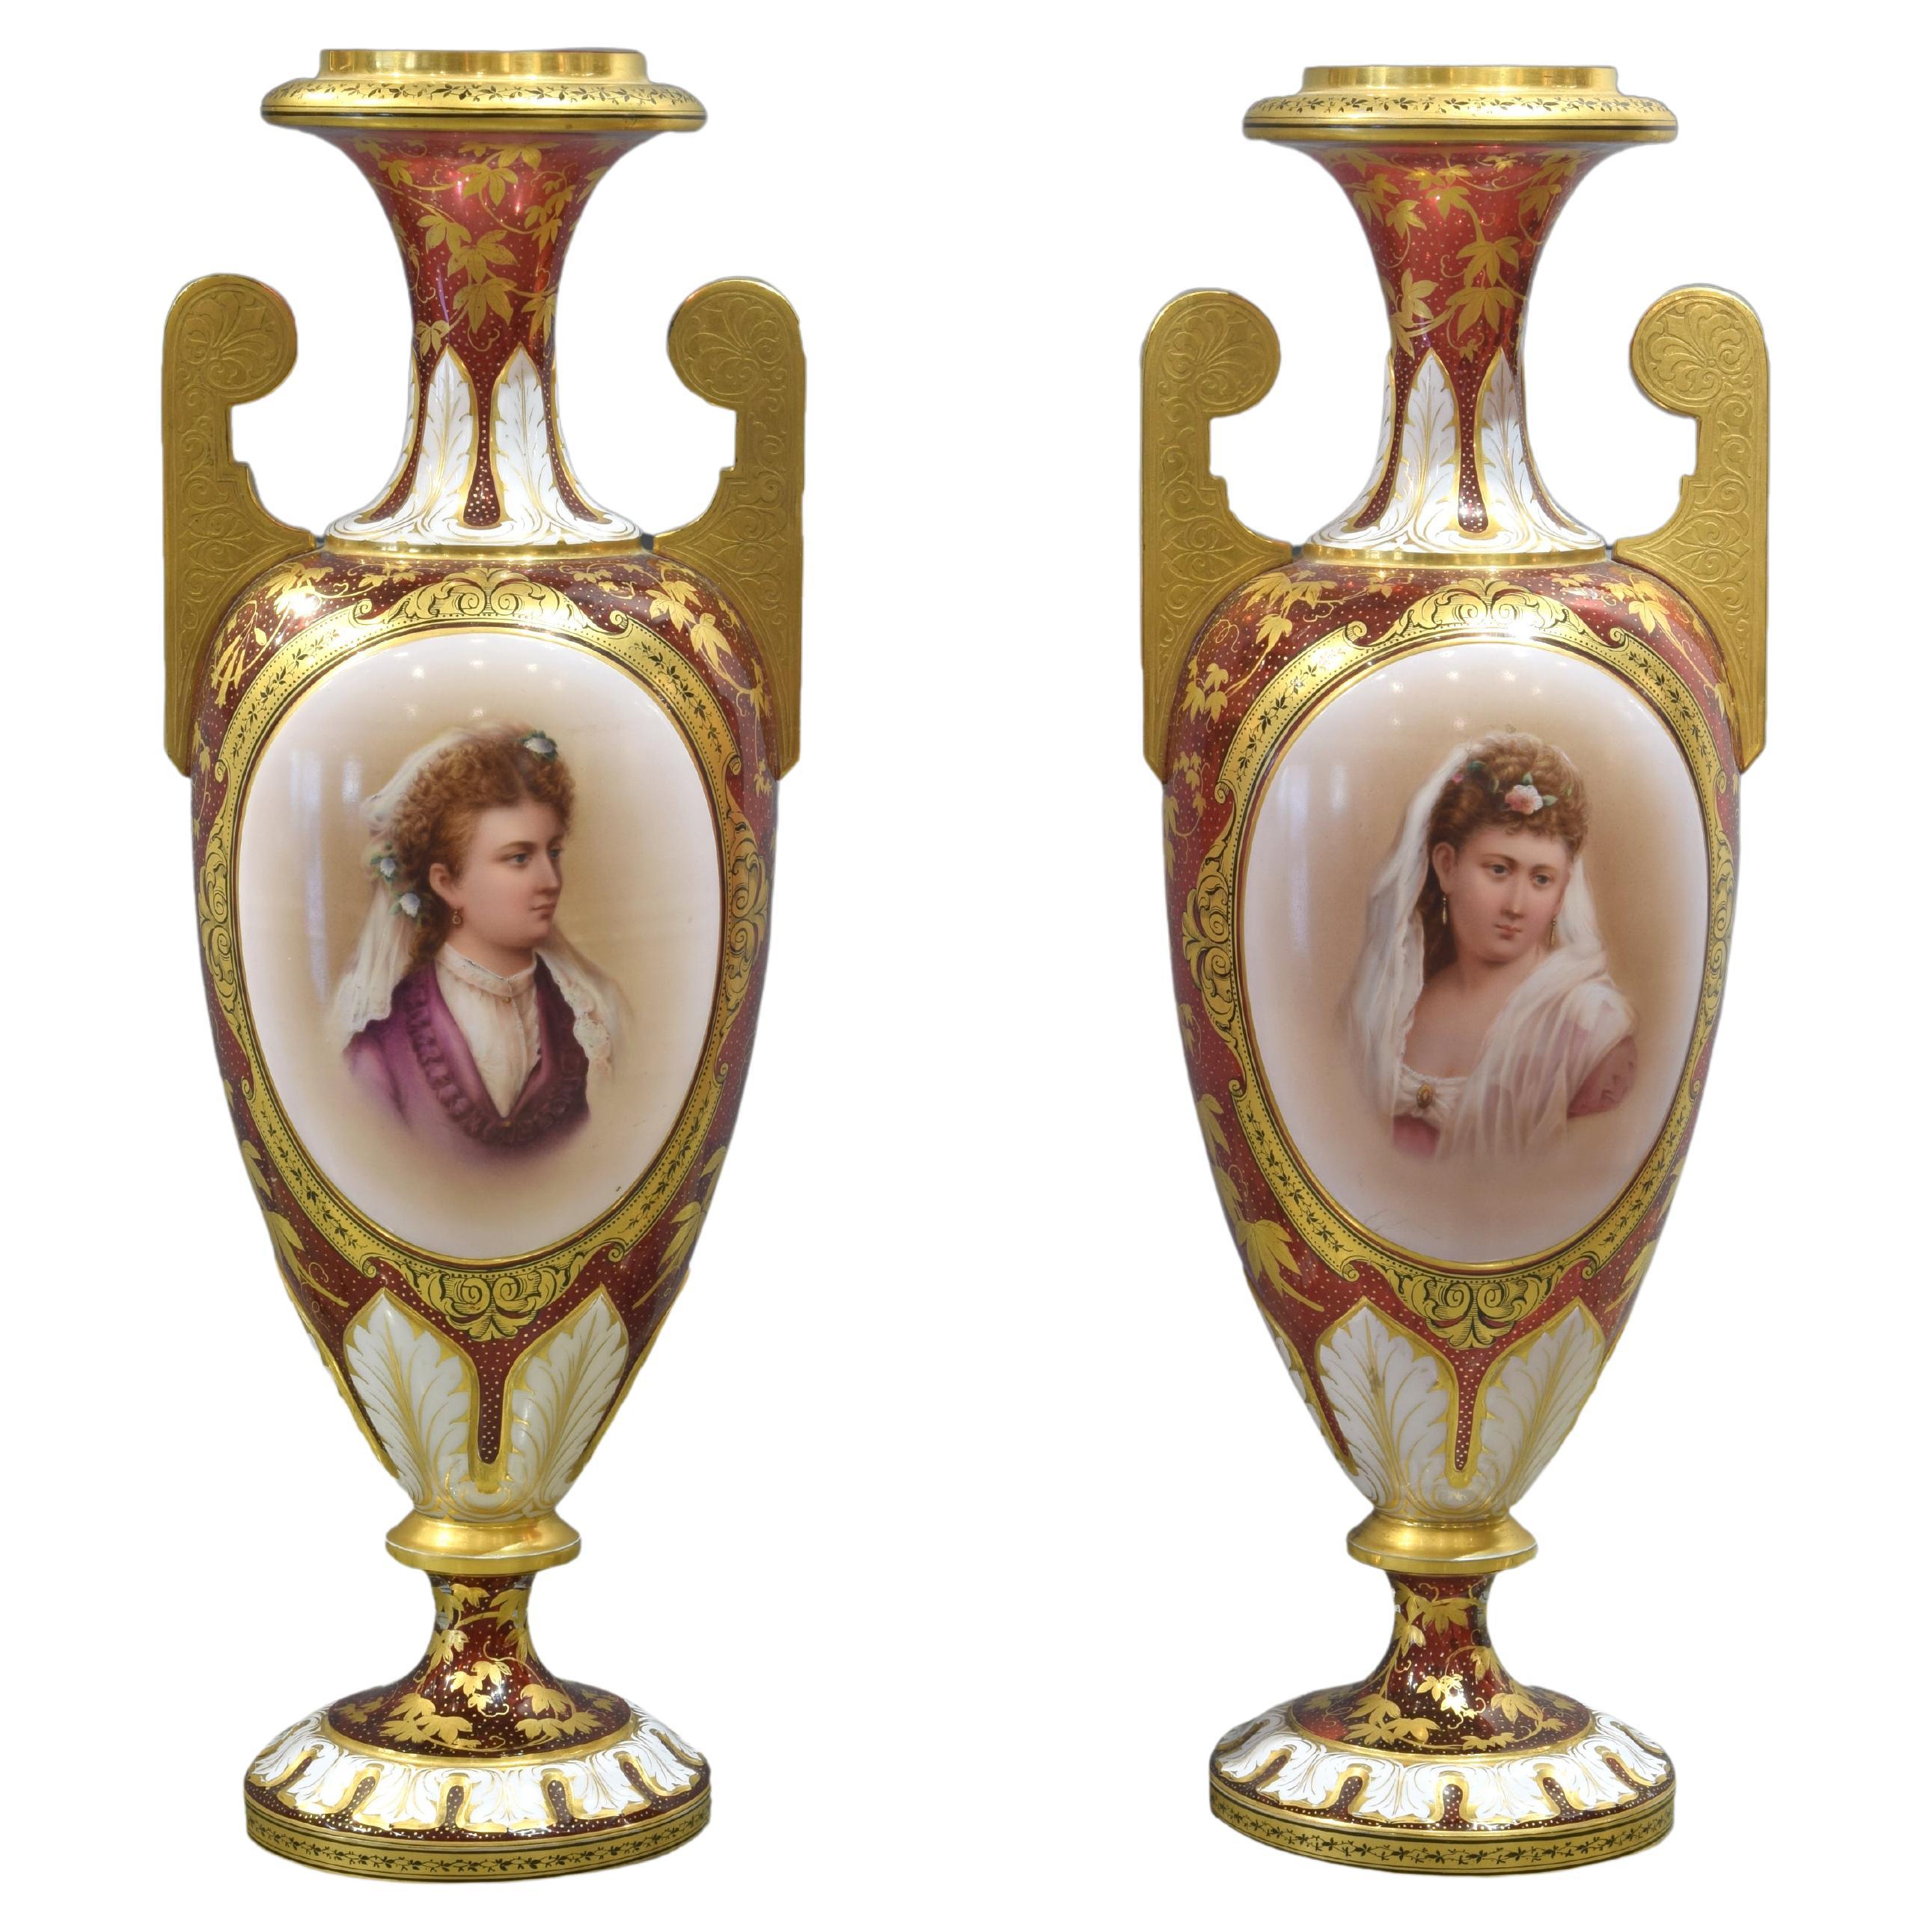 Pair of Ruby Red Glass Urns with Portraits, Bohemia, 19th Century